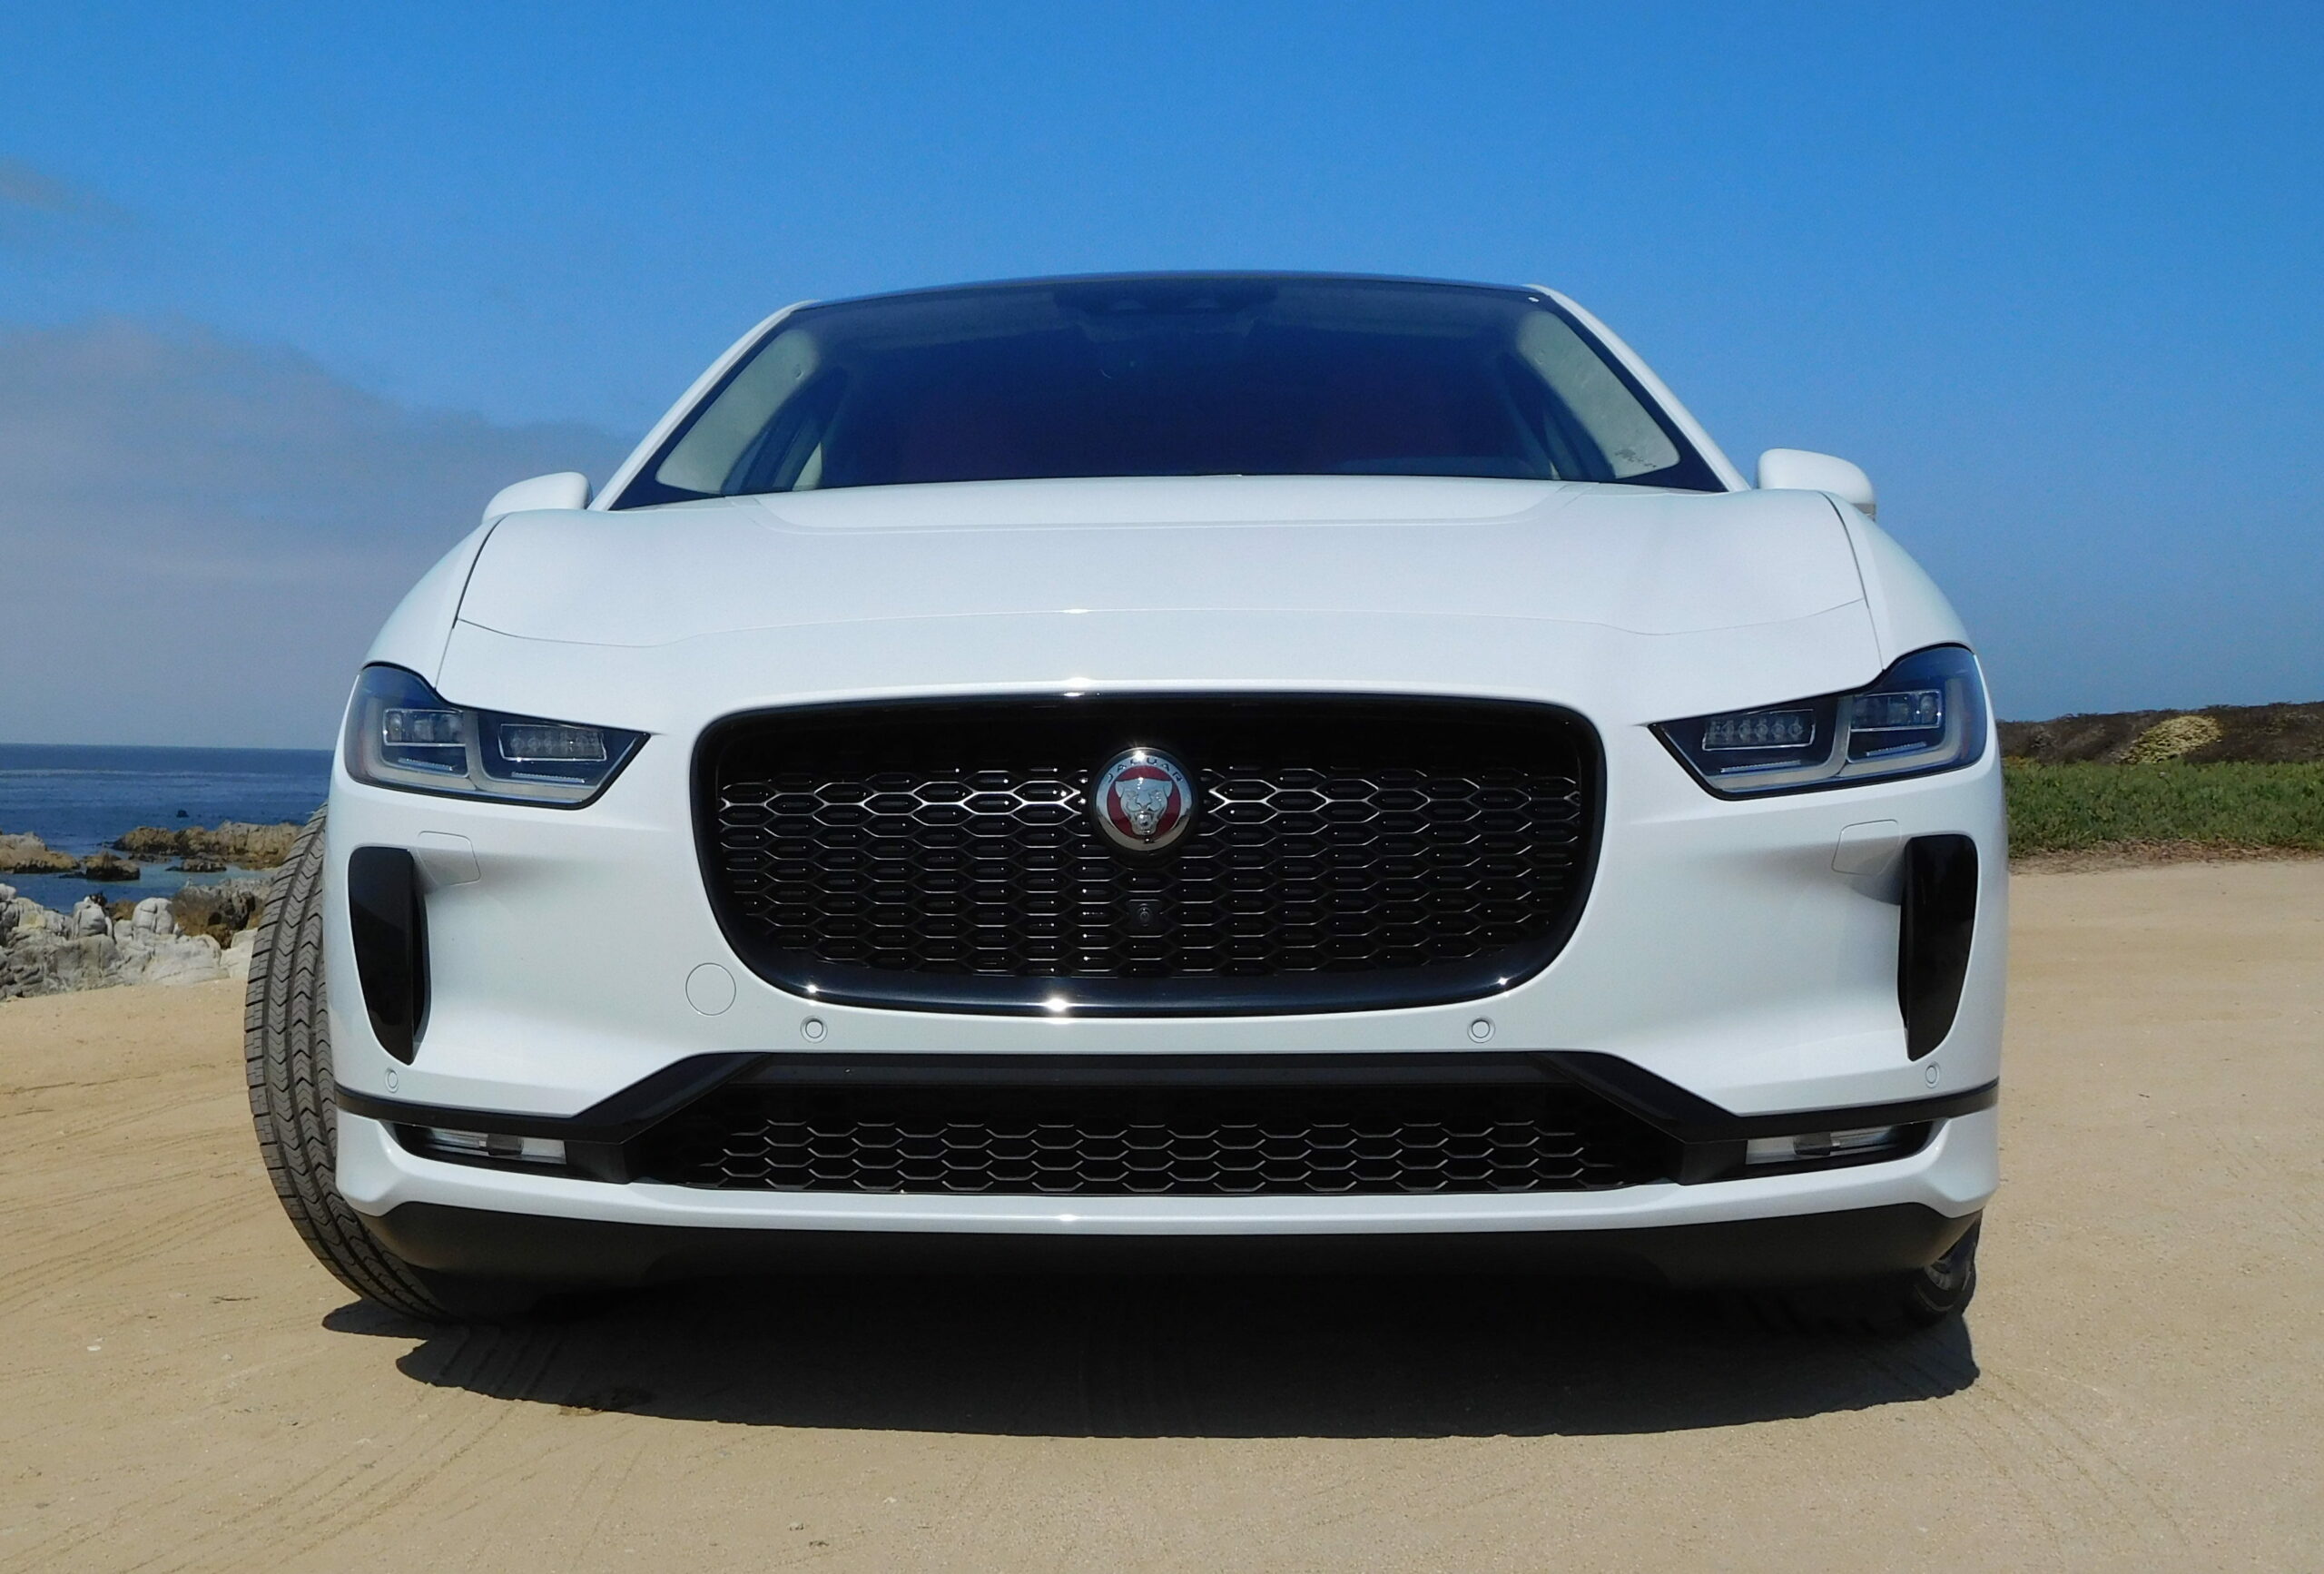 A head on view of the Jaguar iPace